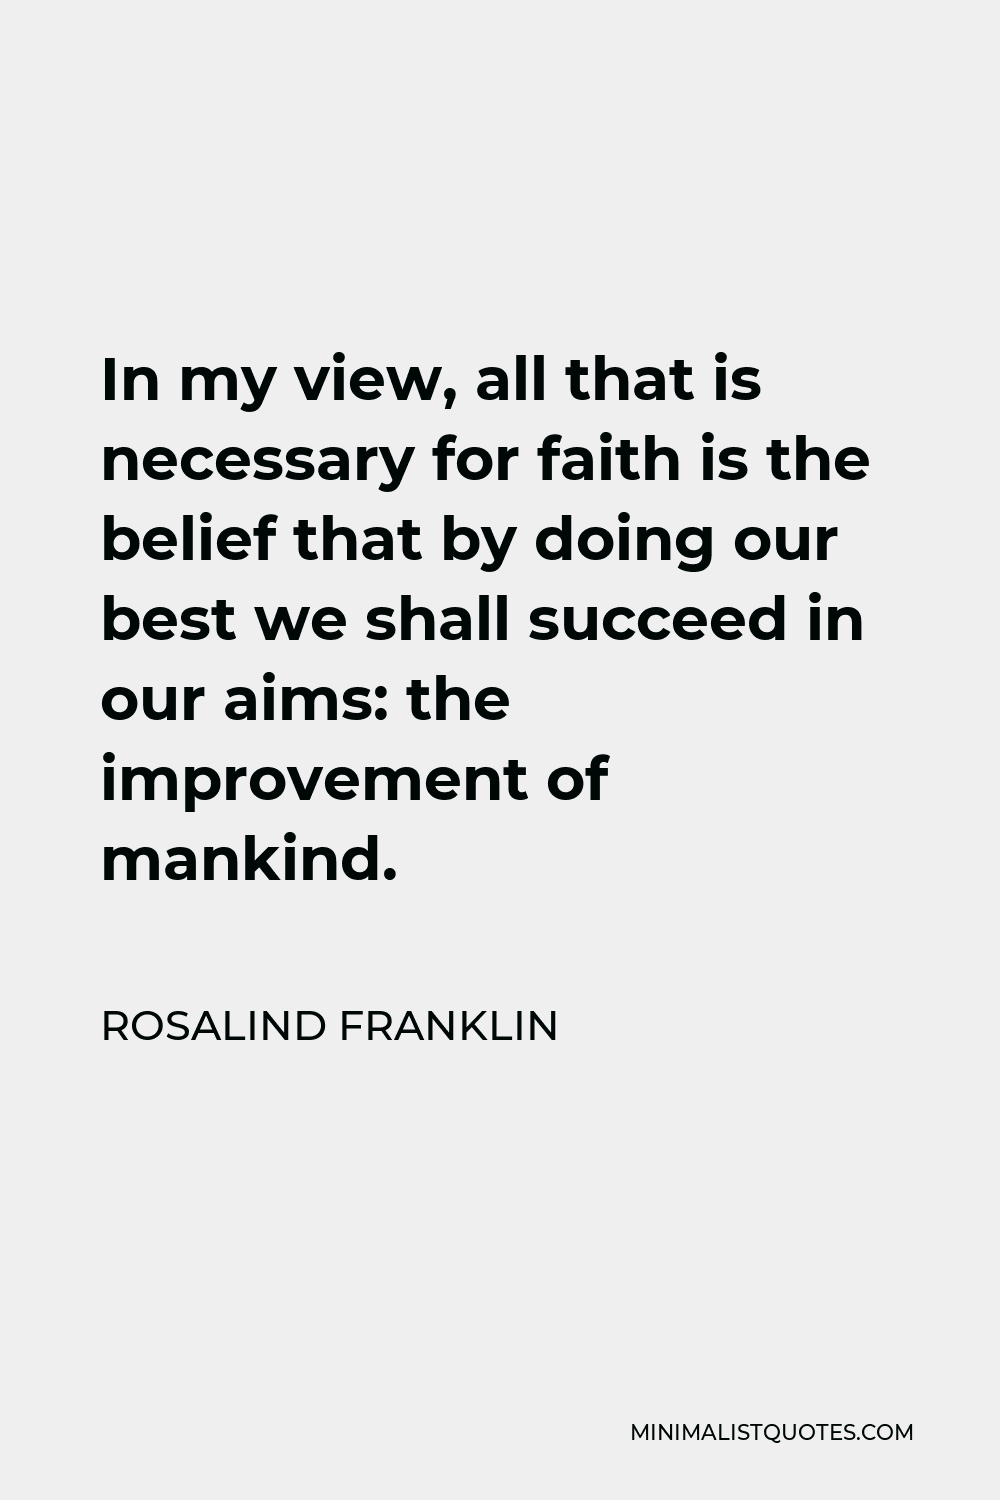 Rosalind Franklin Quote - In my view, all that is necessary for faith is the belief that by doing our best we shall succeed in our aims: the improvement of mankind.